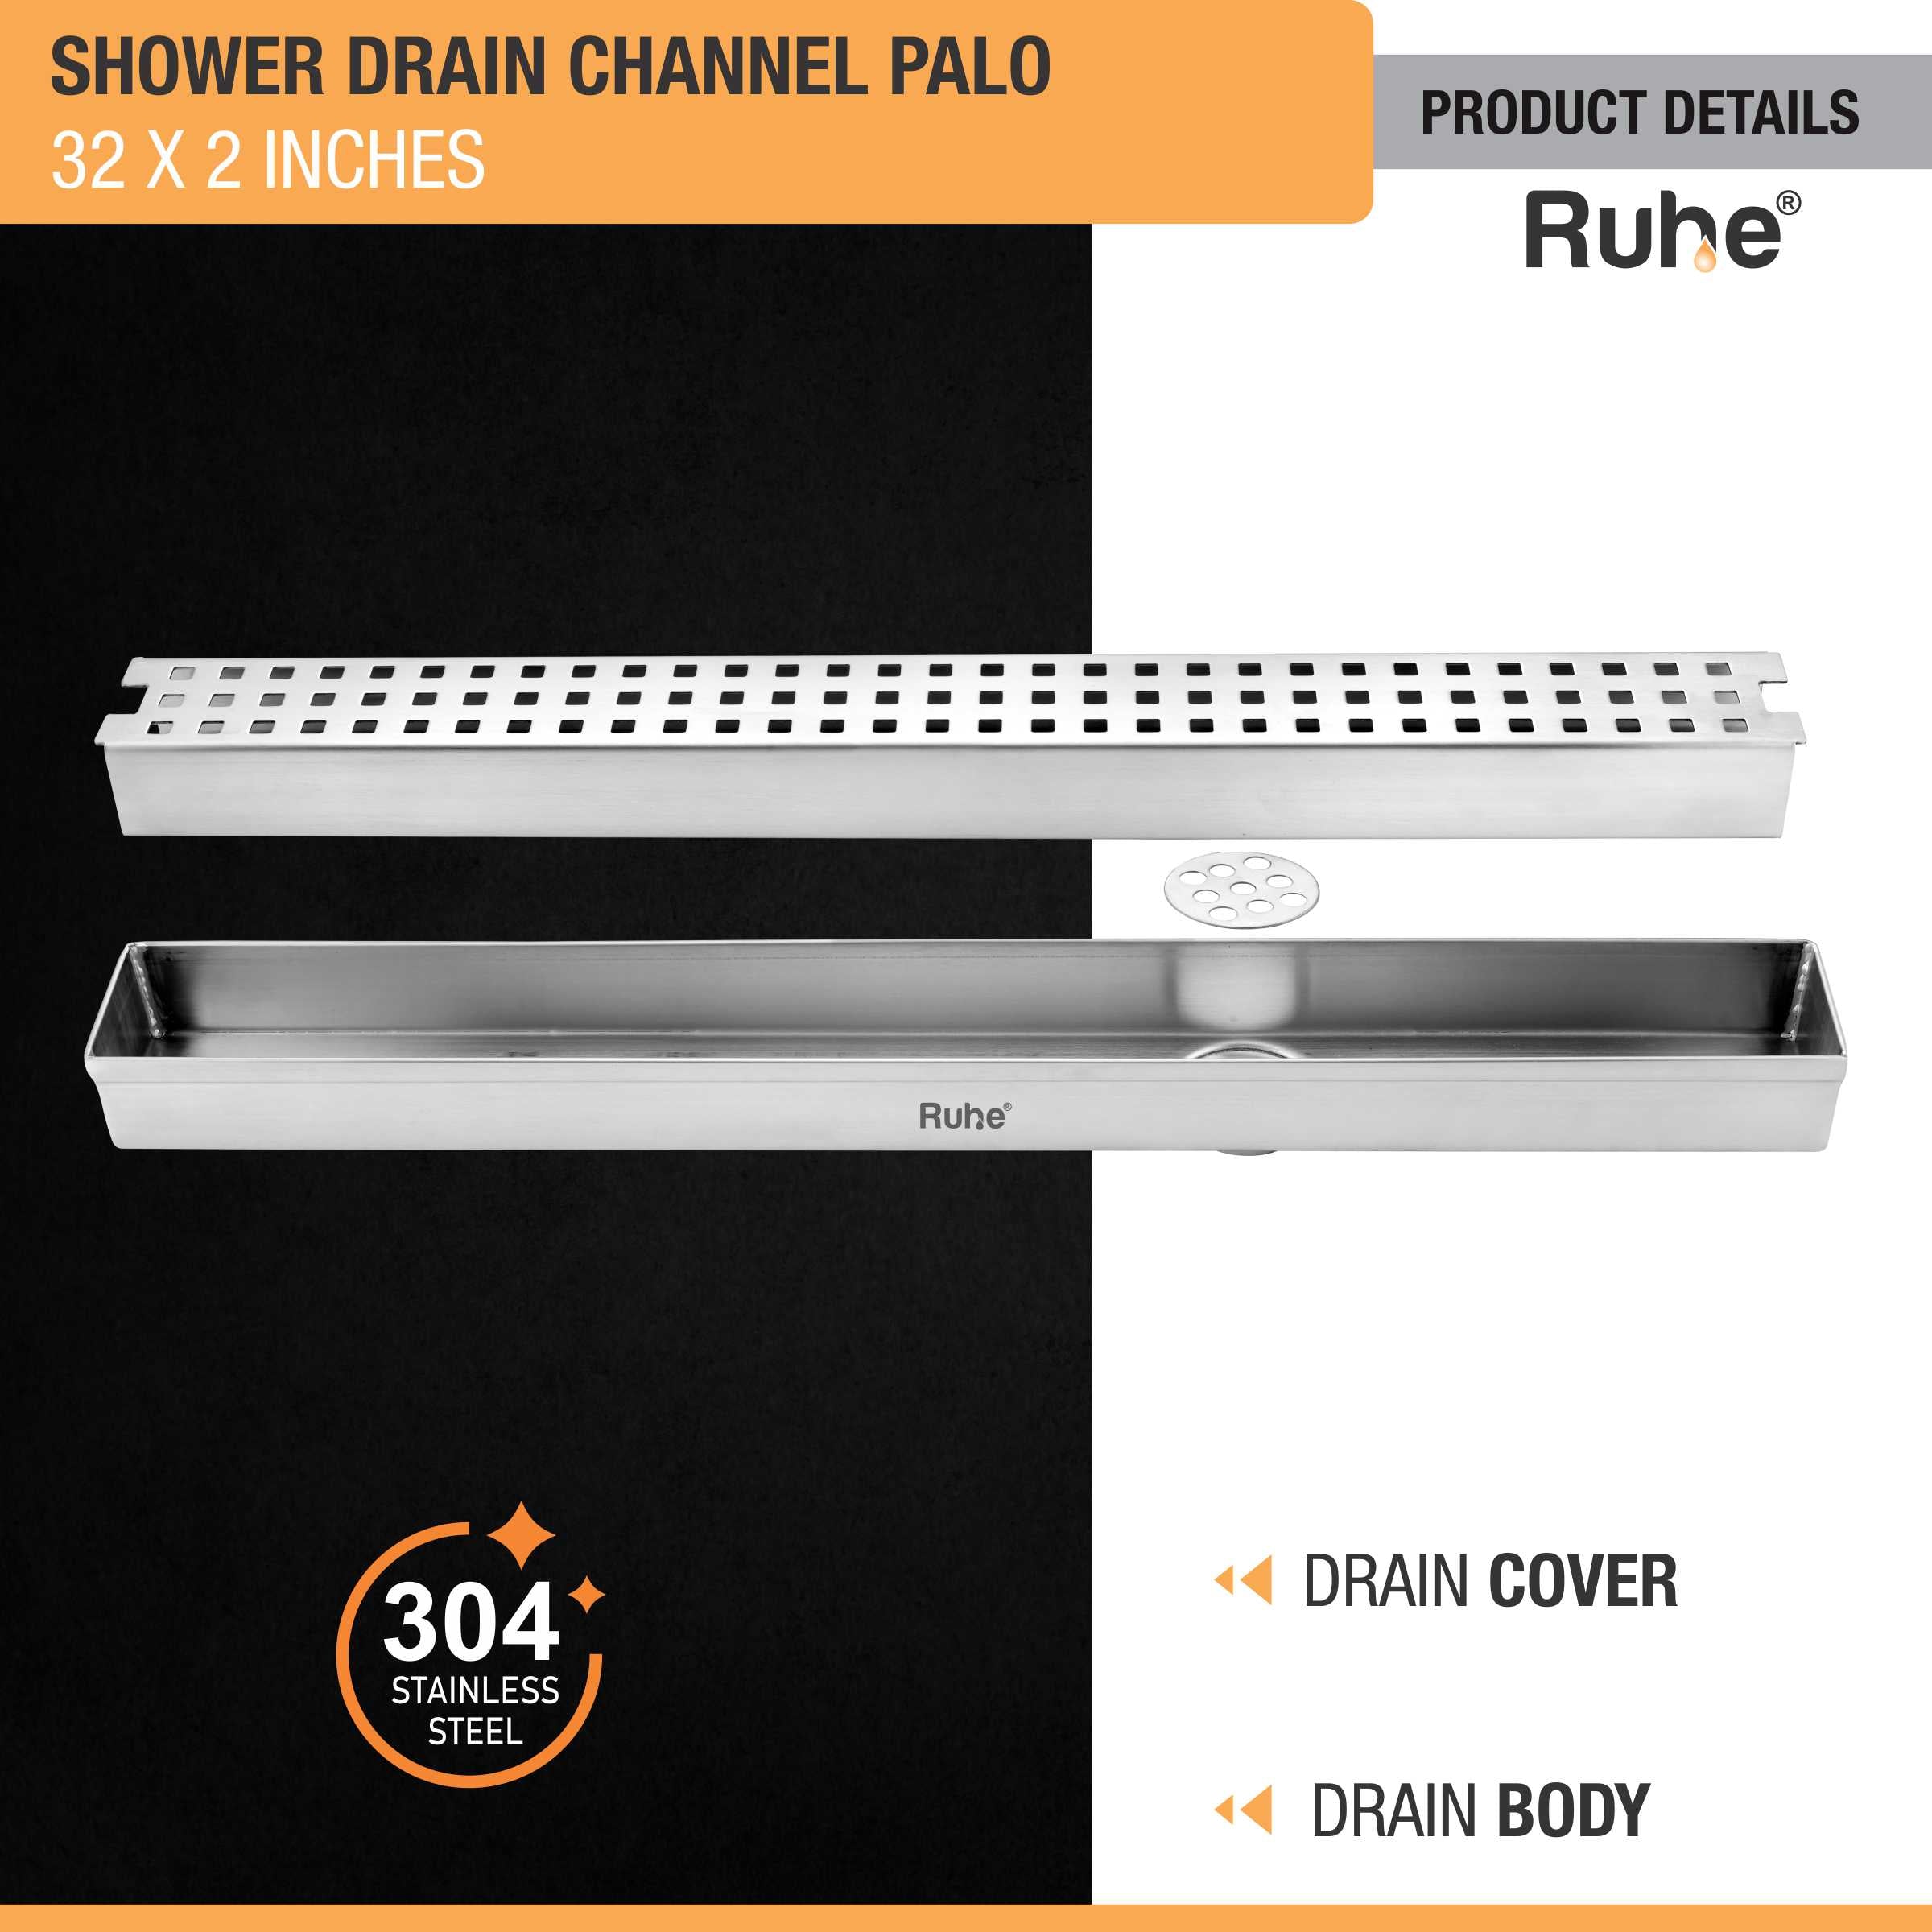 Palo Shower Drain Channel (32 X 2 Inches) (304 Grade) product details